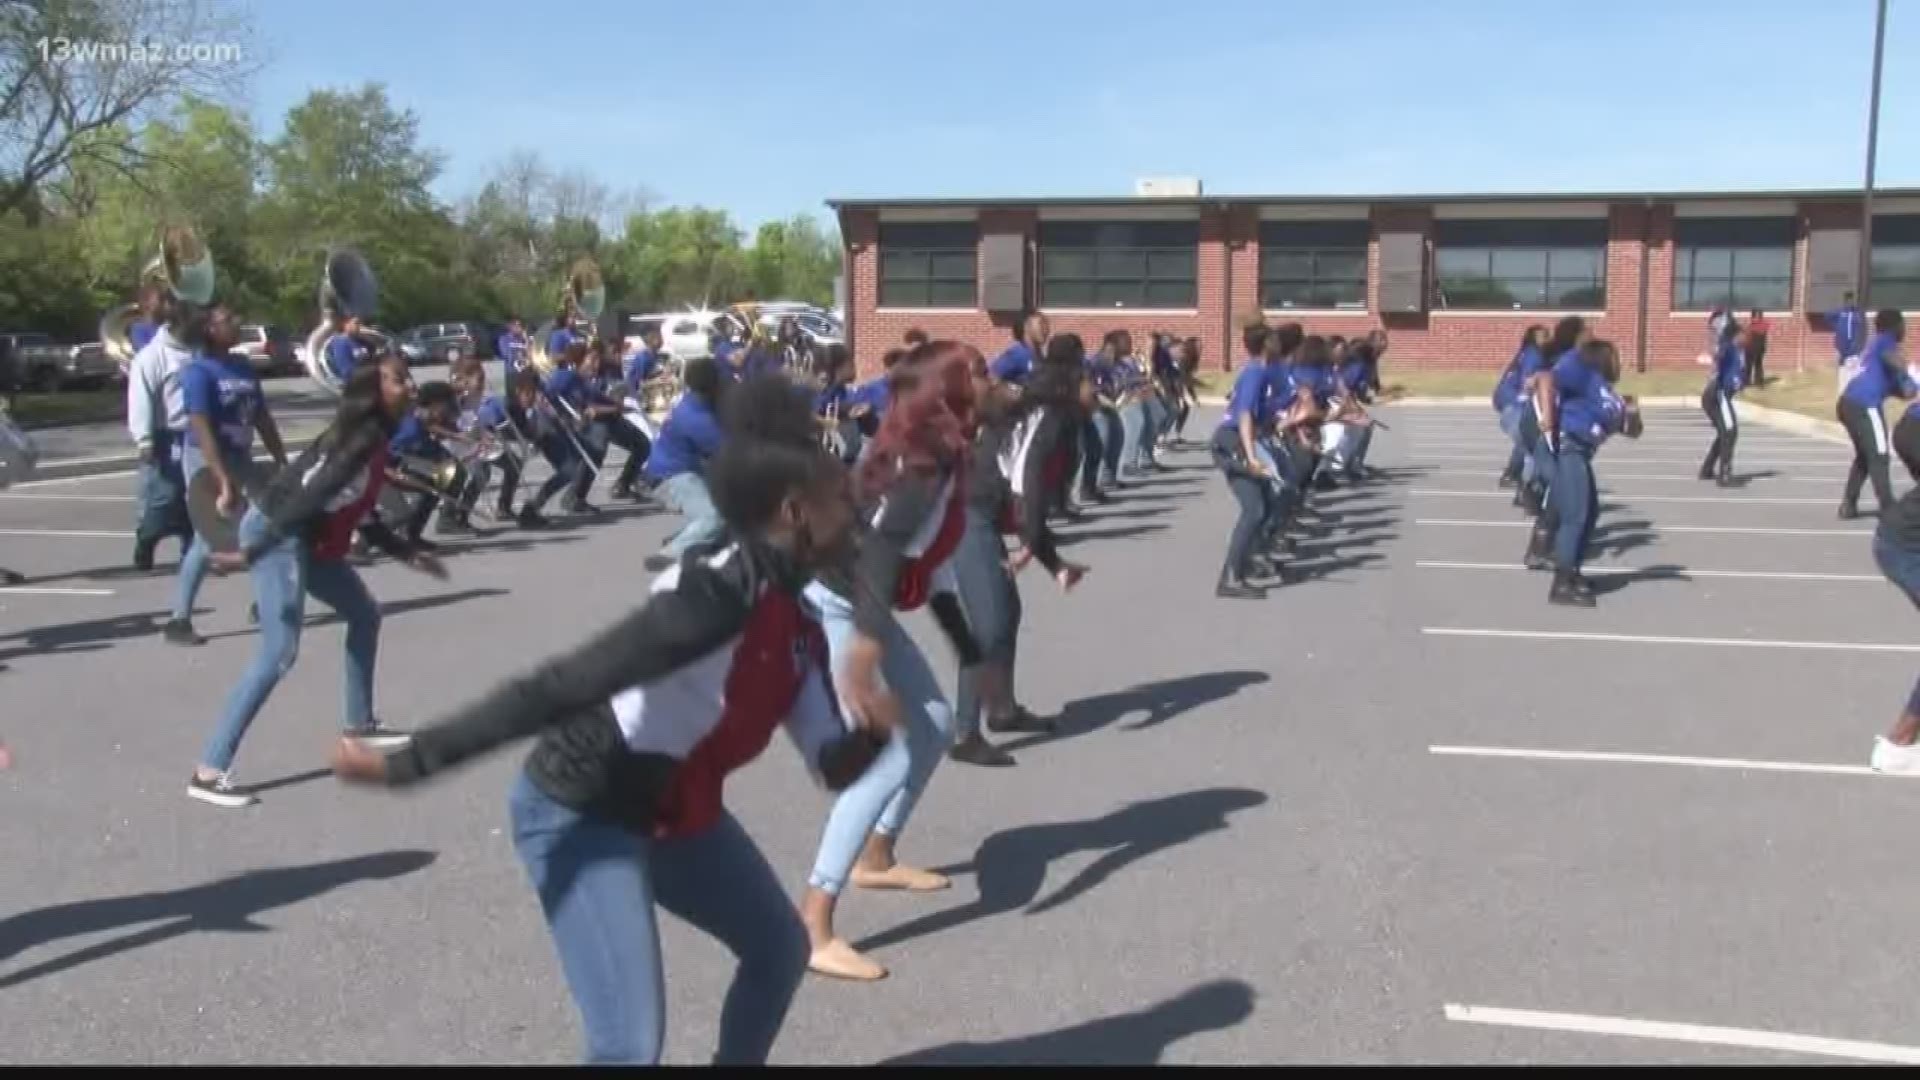 Cirrus Academy welcomed Southwest High School's Marching Patriots for a pep rally Wednesday afternoon to get students ready for state testing.